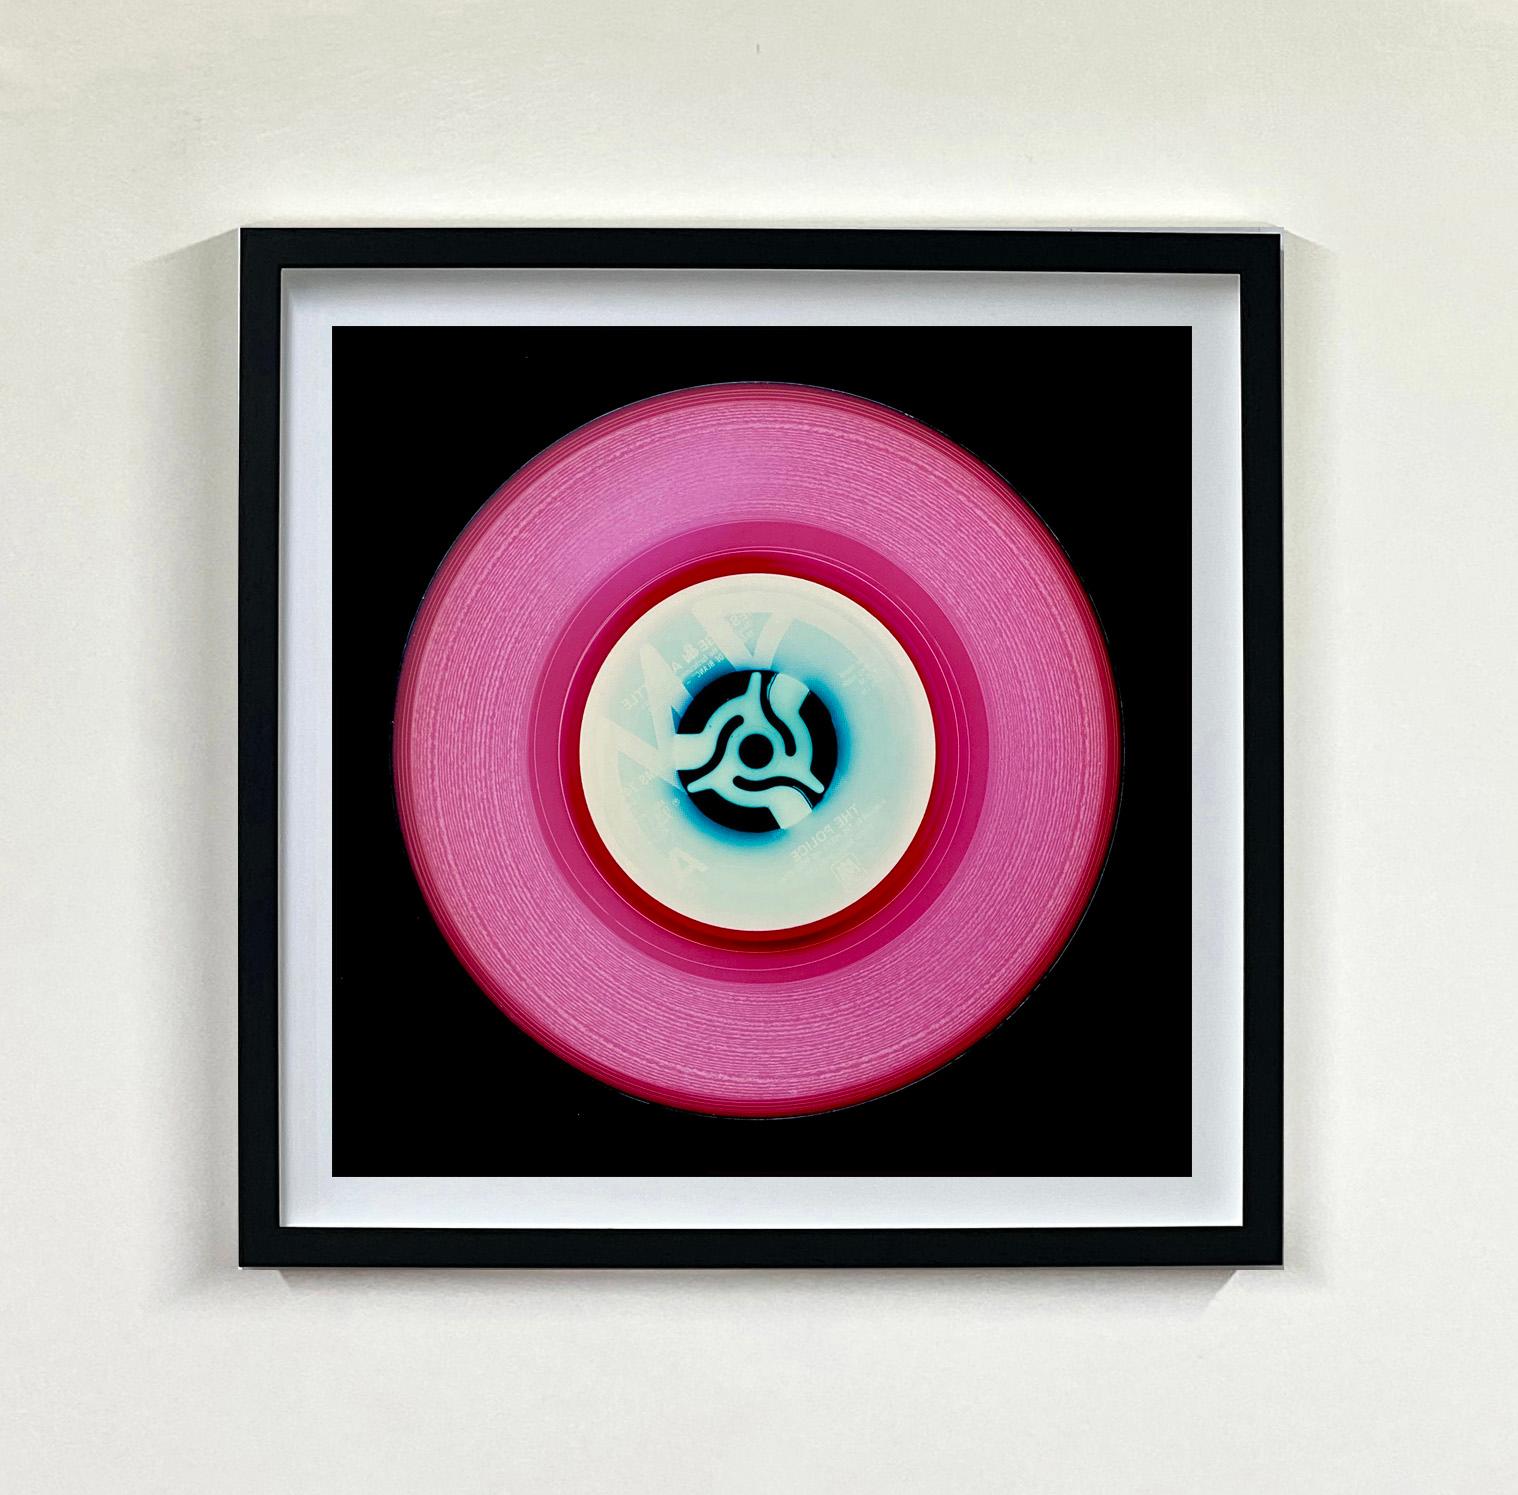 Heidler & Heeps Vinyl Collection Twenty Piece Multi-Color Installation.
Acclaimed contemporary photographers, Richard Heeps and Natasha Heidler have collaborated to make this beautifully mesmerising collection. A celebration of the vinyl record and